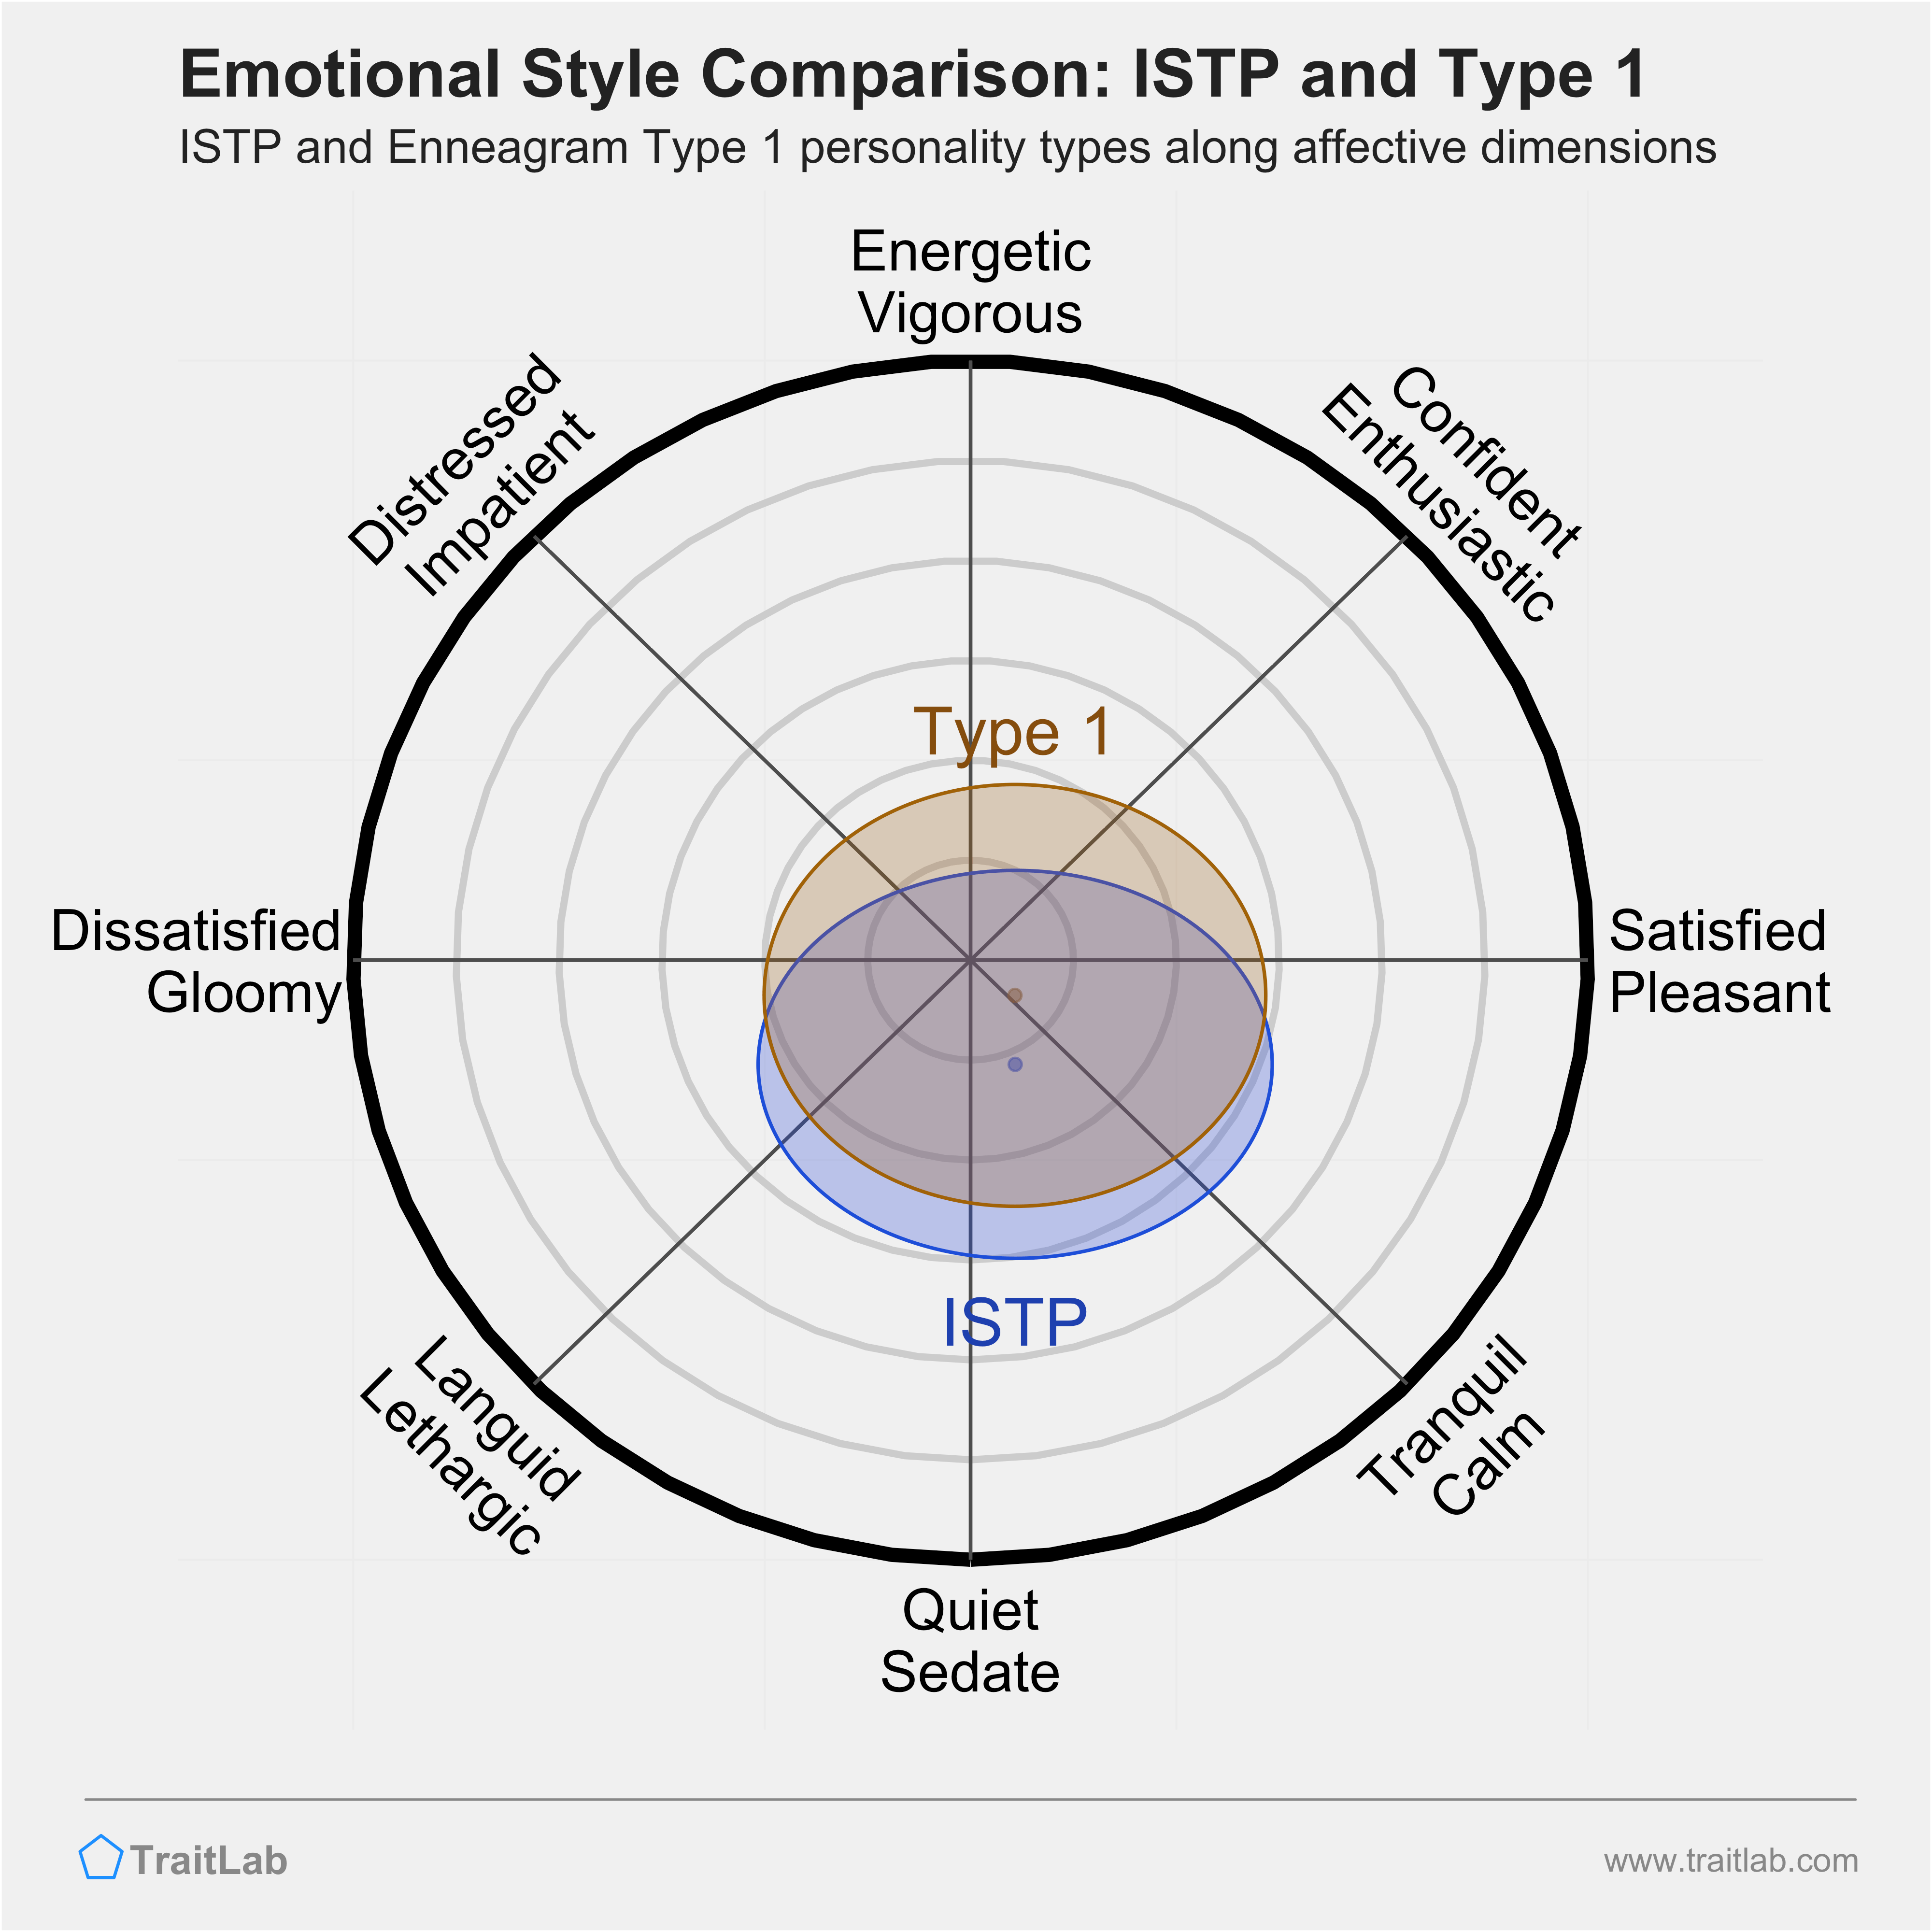 ISTP and Type 1 comparison across emotional (affective) dimensions